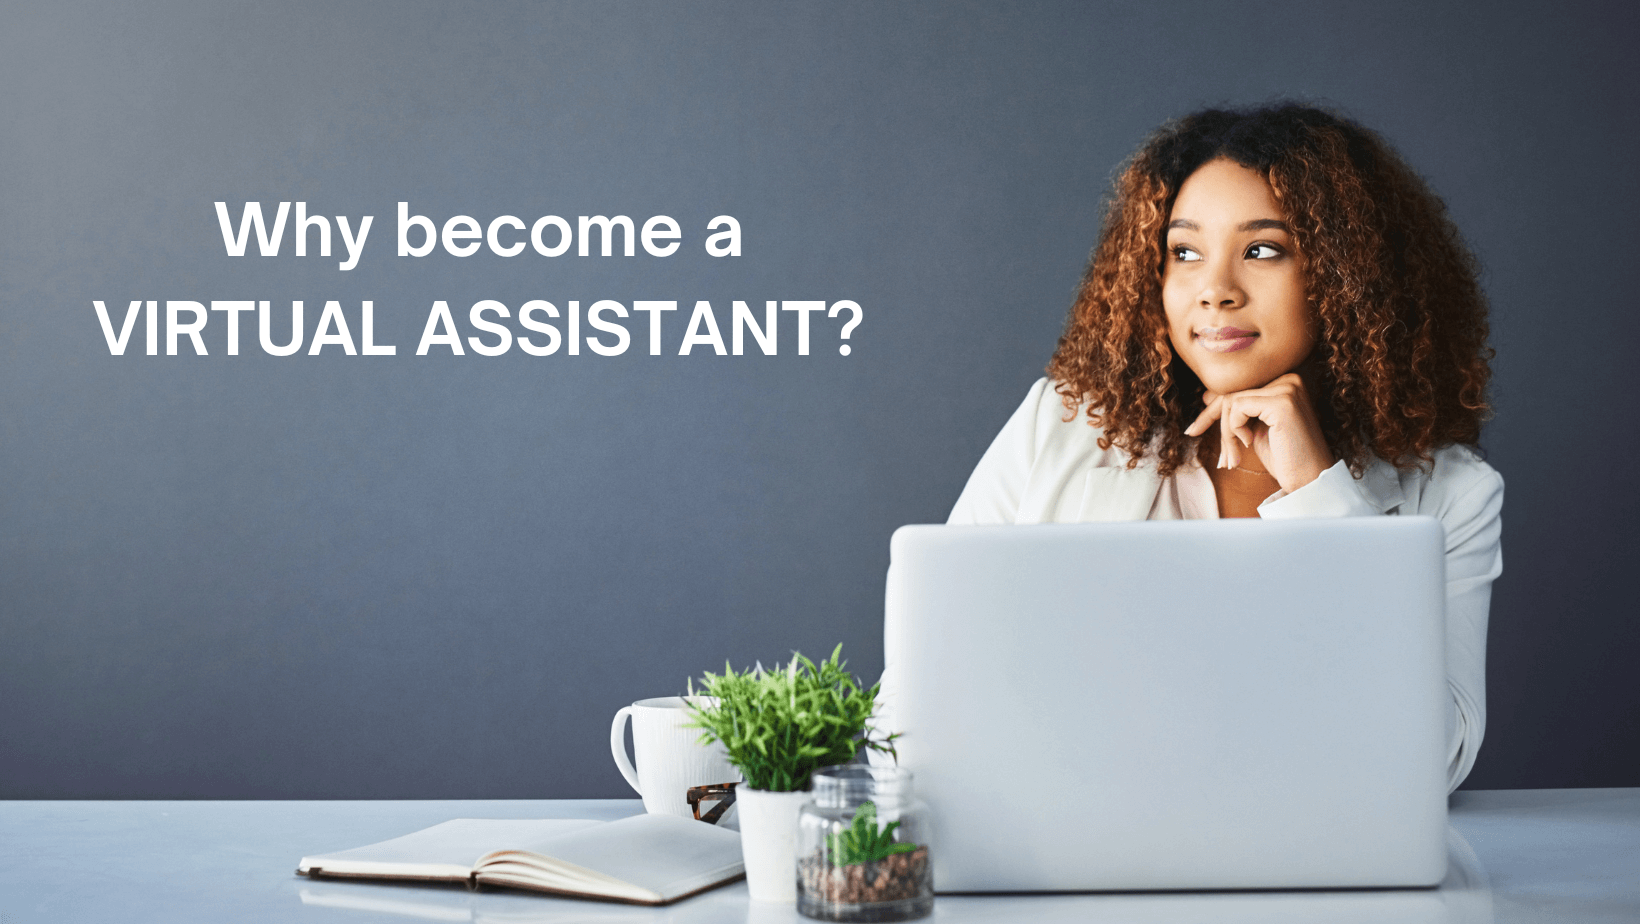 Why VA - Why Would Someone Want to Become a Virtual Assistant?